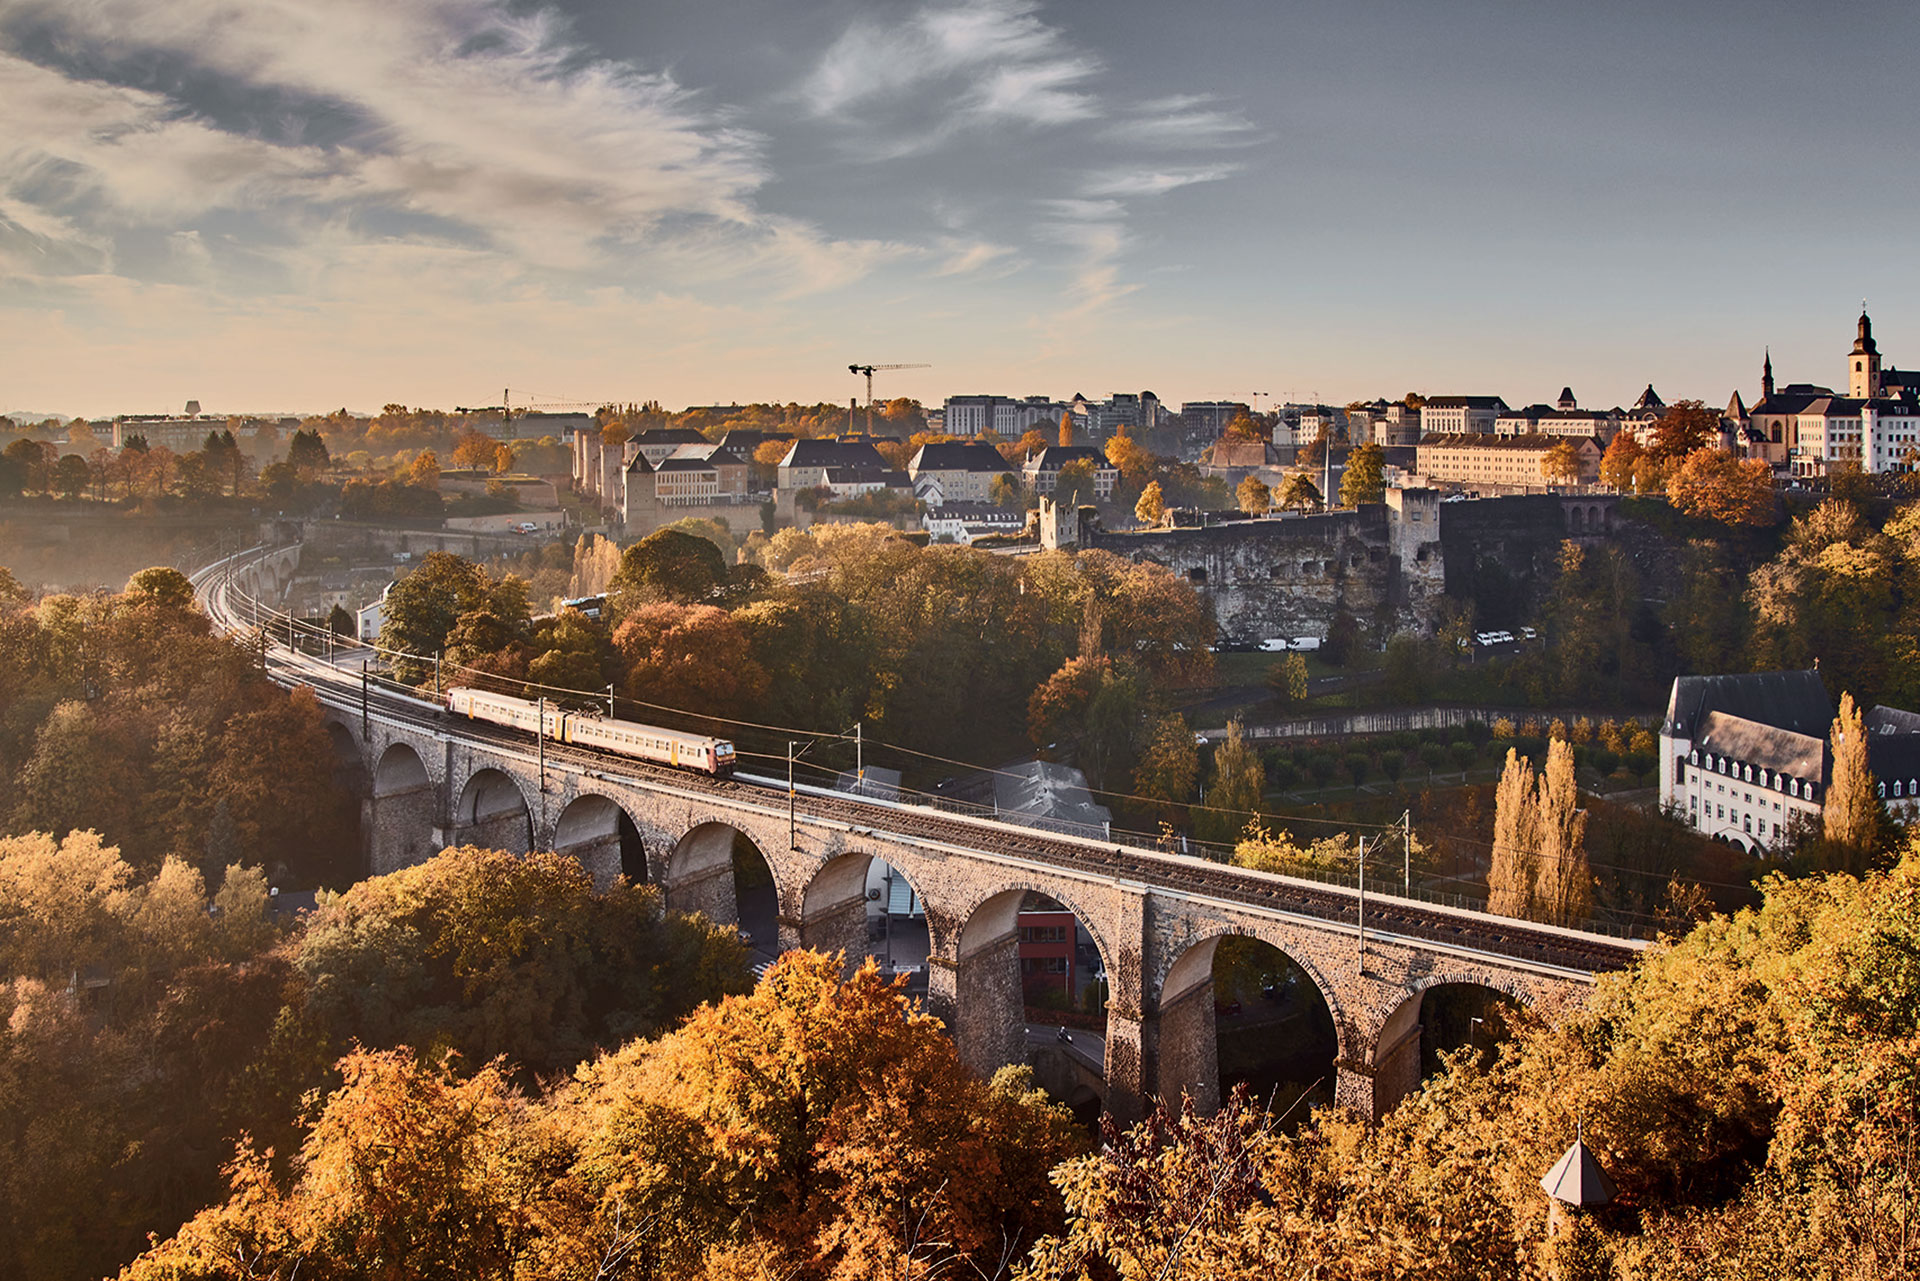 22 good reasons to visit Luxembourg City as a Tourist